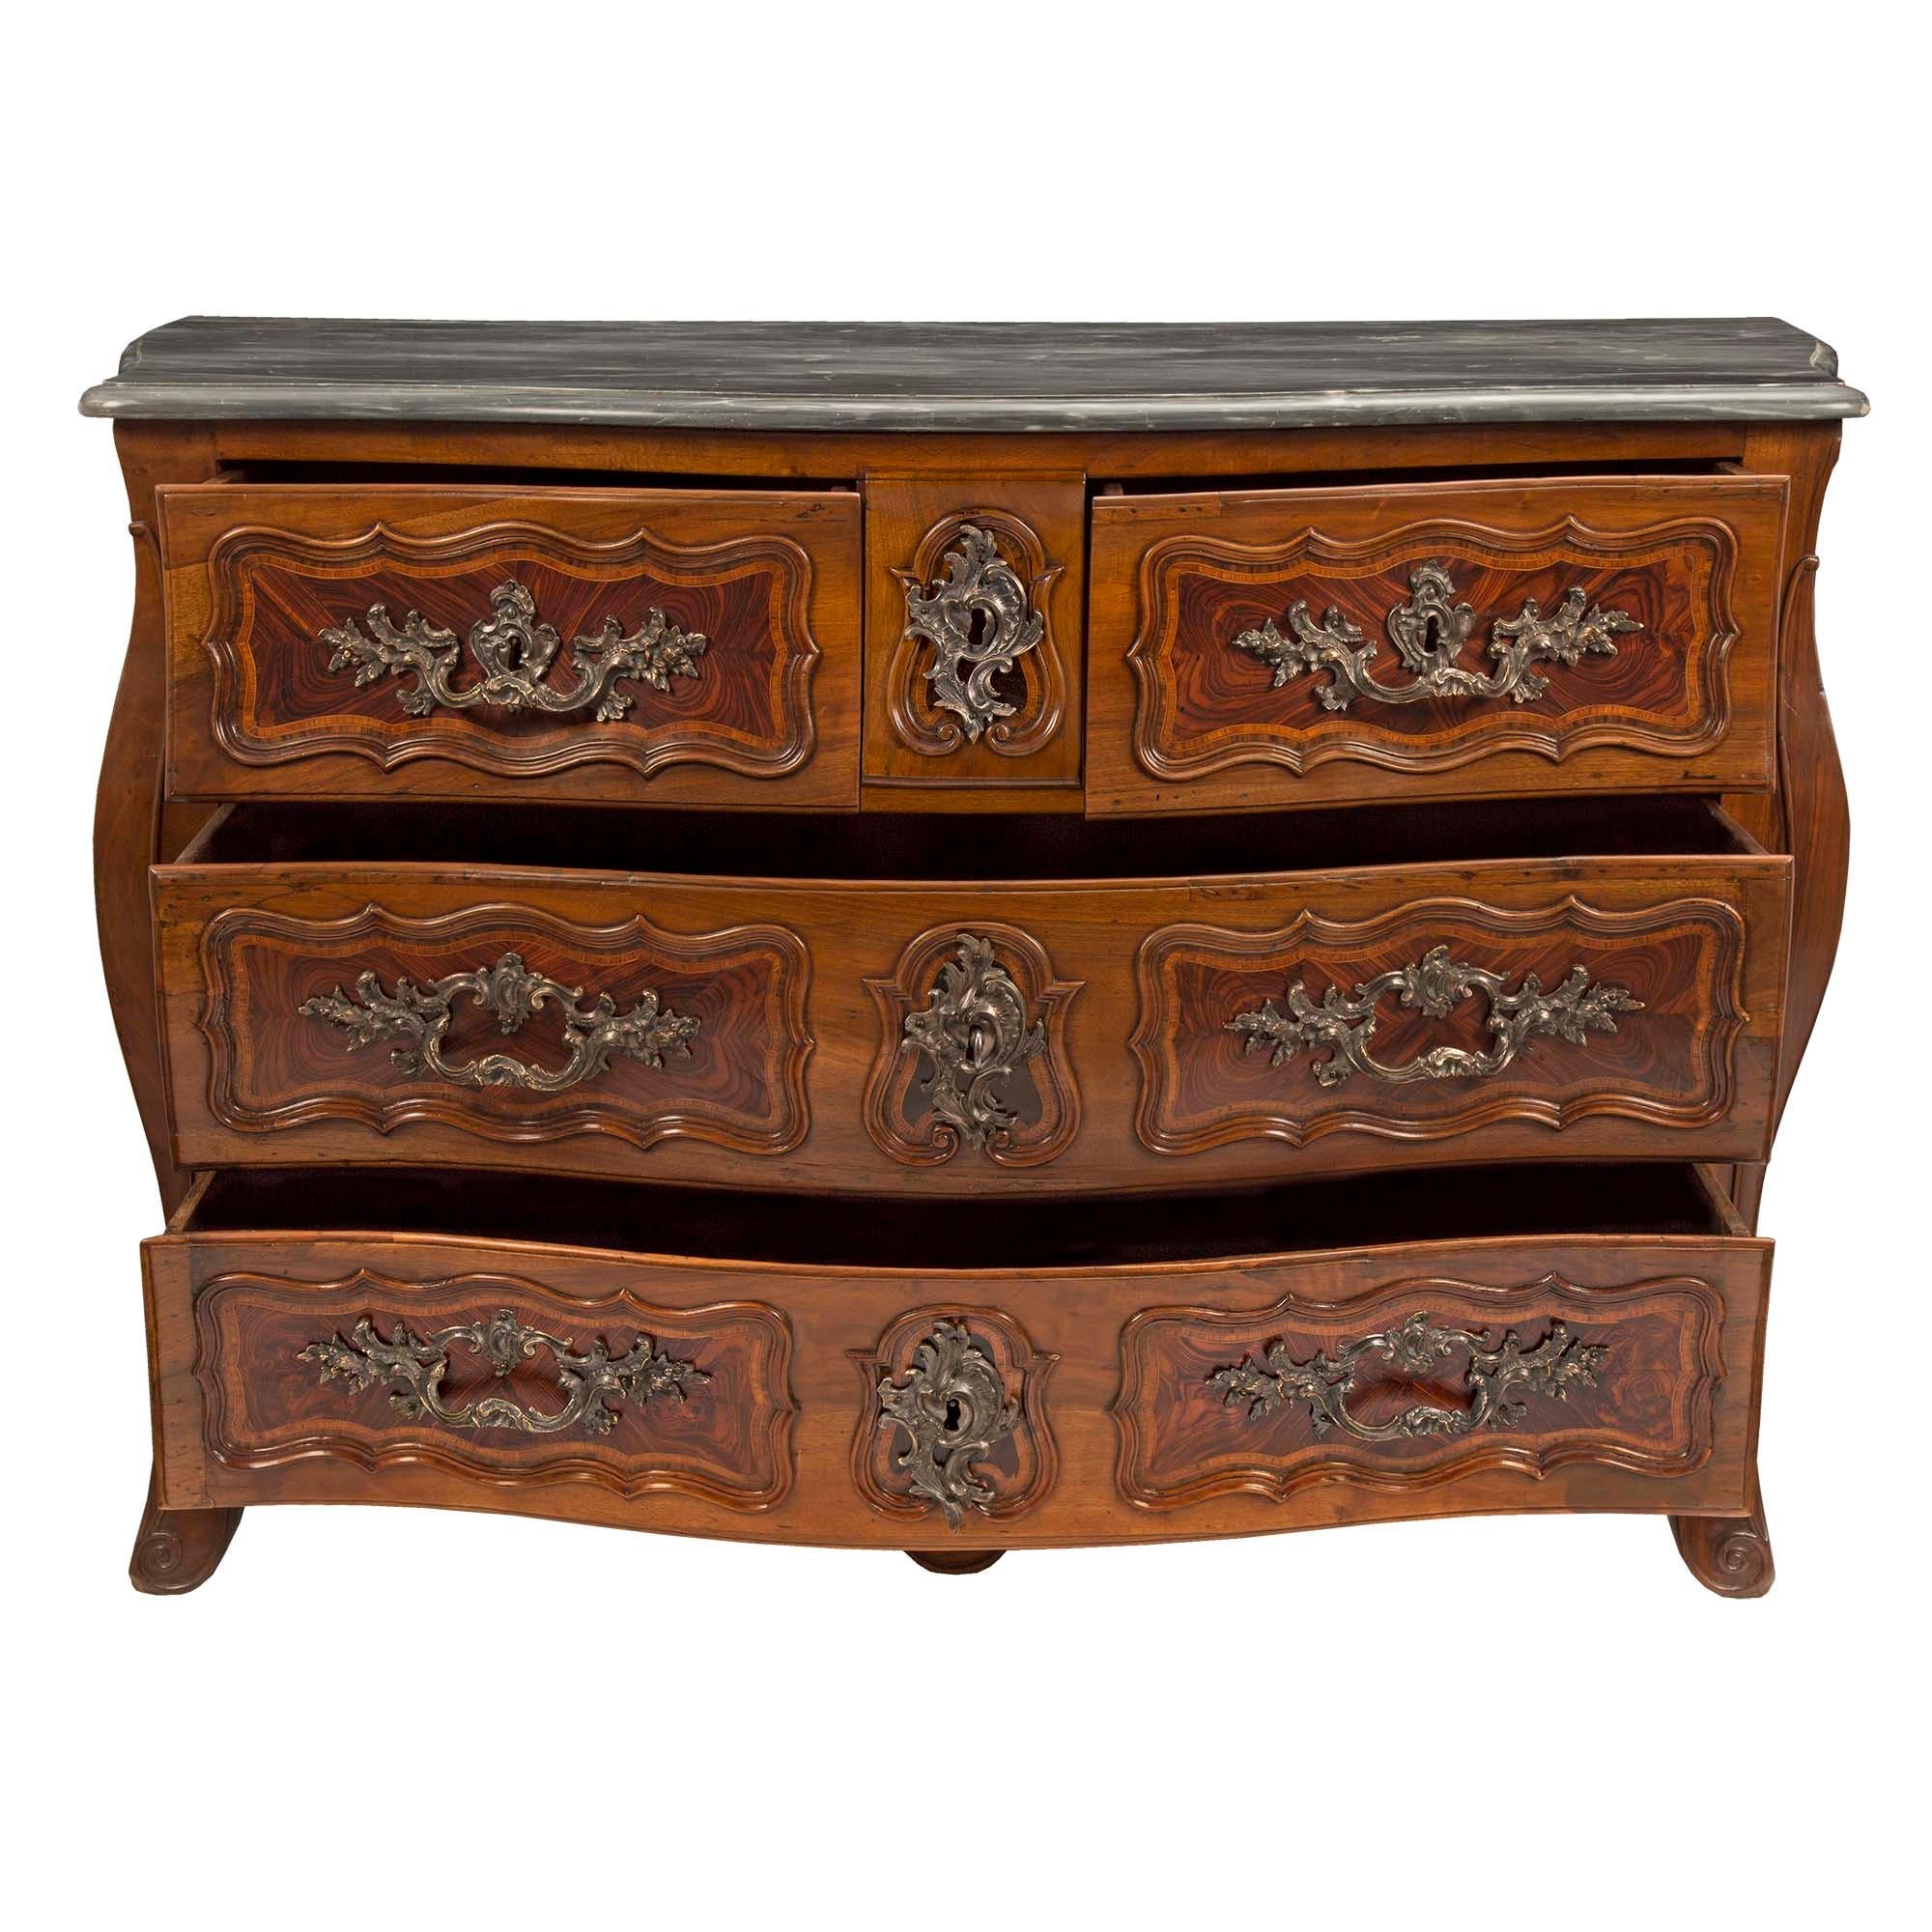 A very impressive and high quality French early 18th century Louis XV period walnut and rosewood Commode de Château. The chest is raised on slightly curved legs with a scrolled frieze and protruding curved corners. With two smaller drawers at the